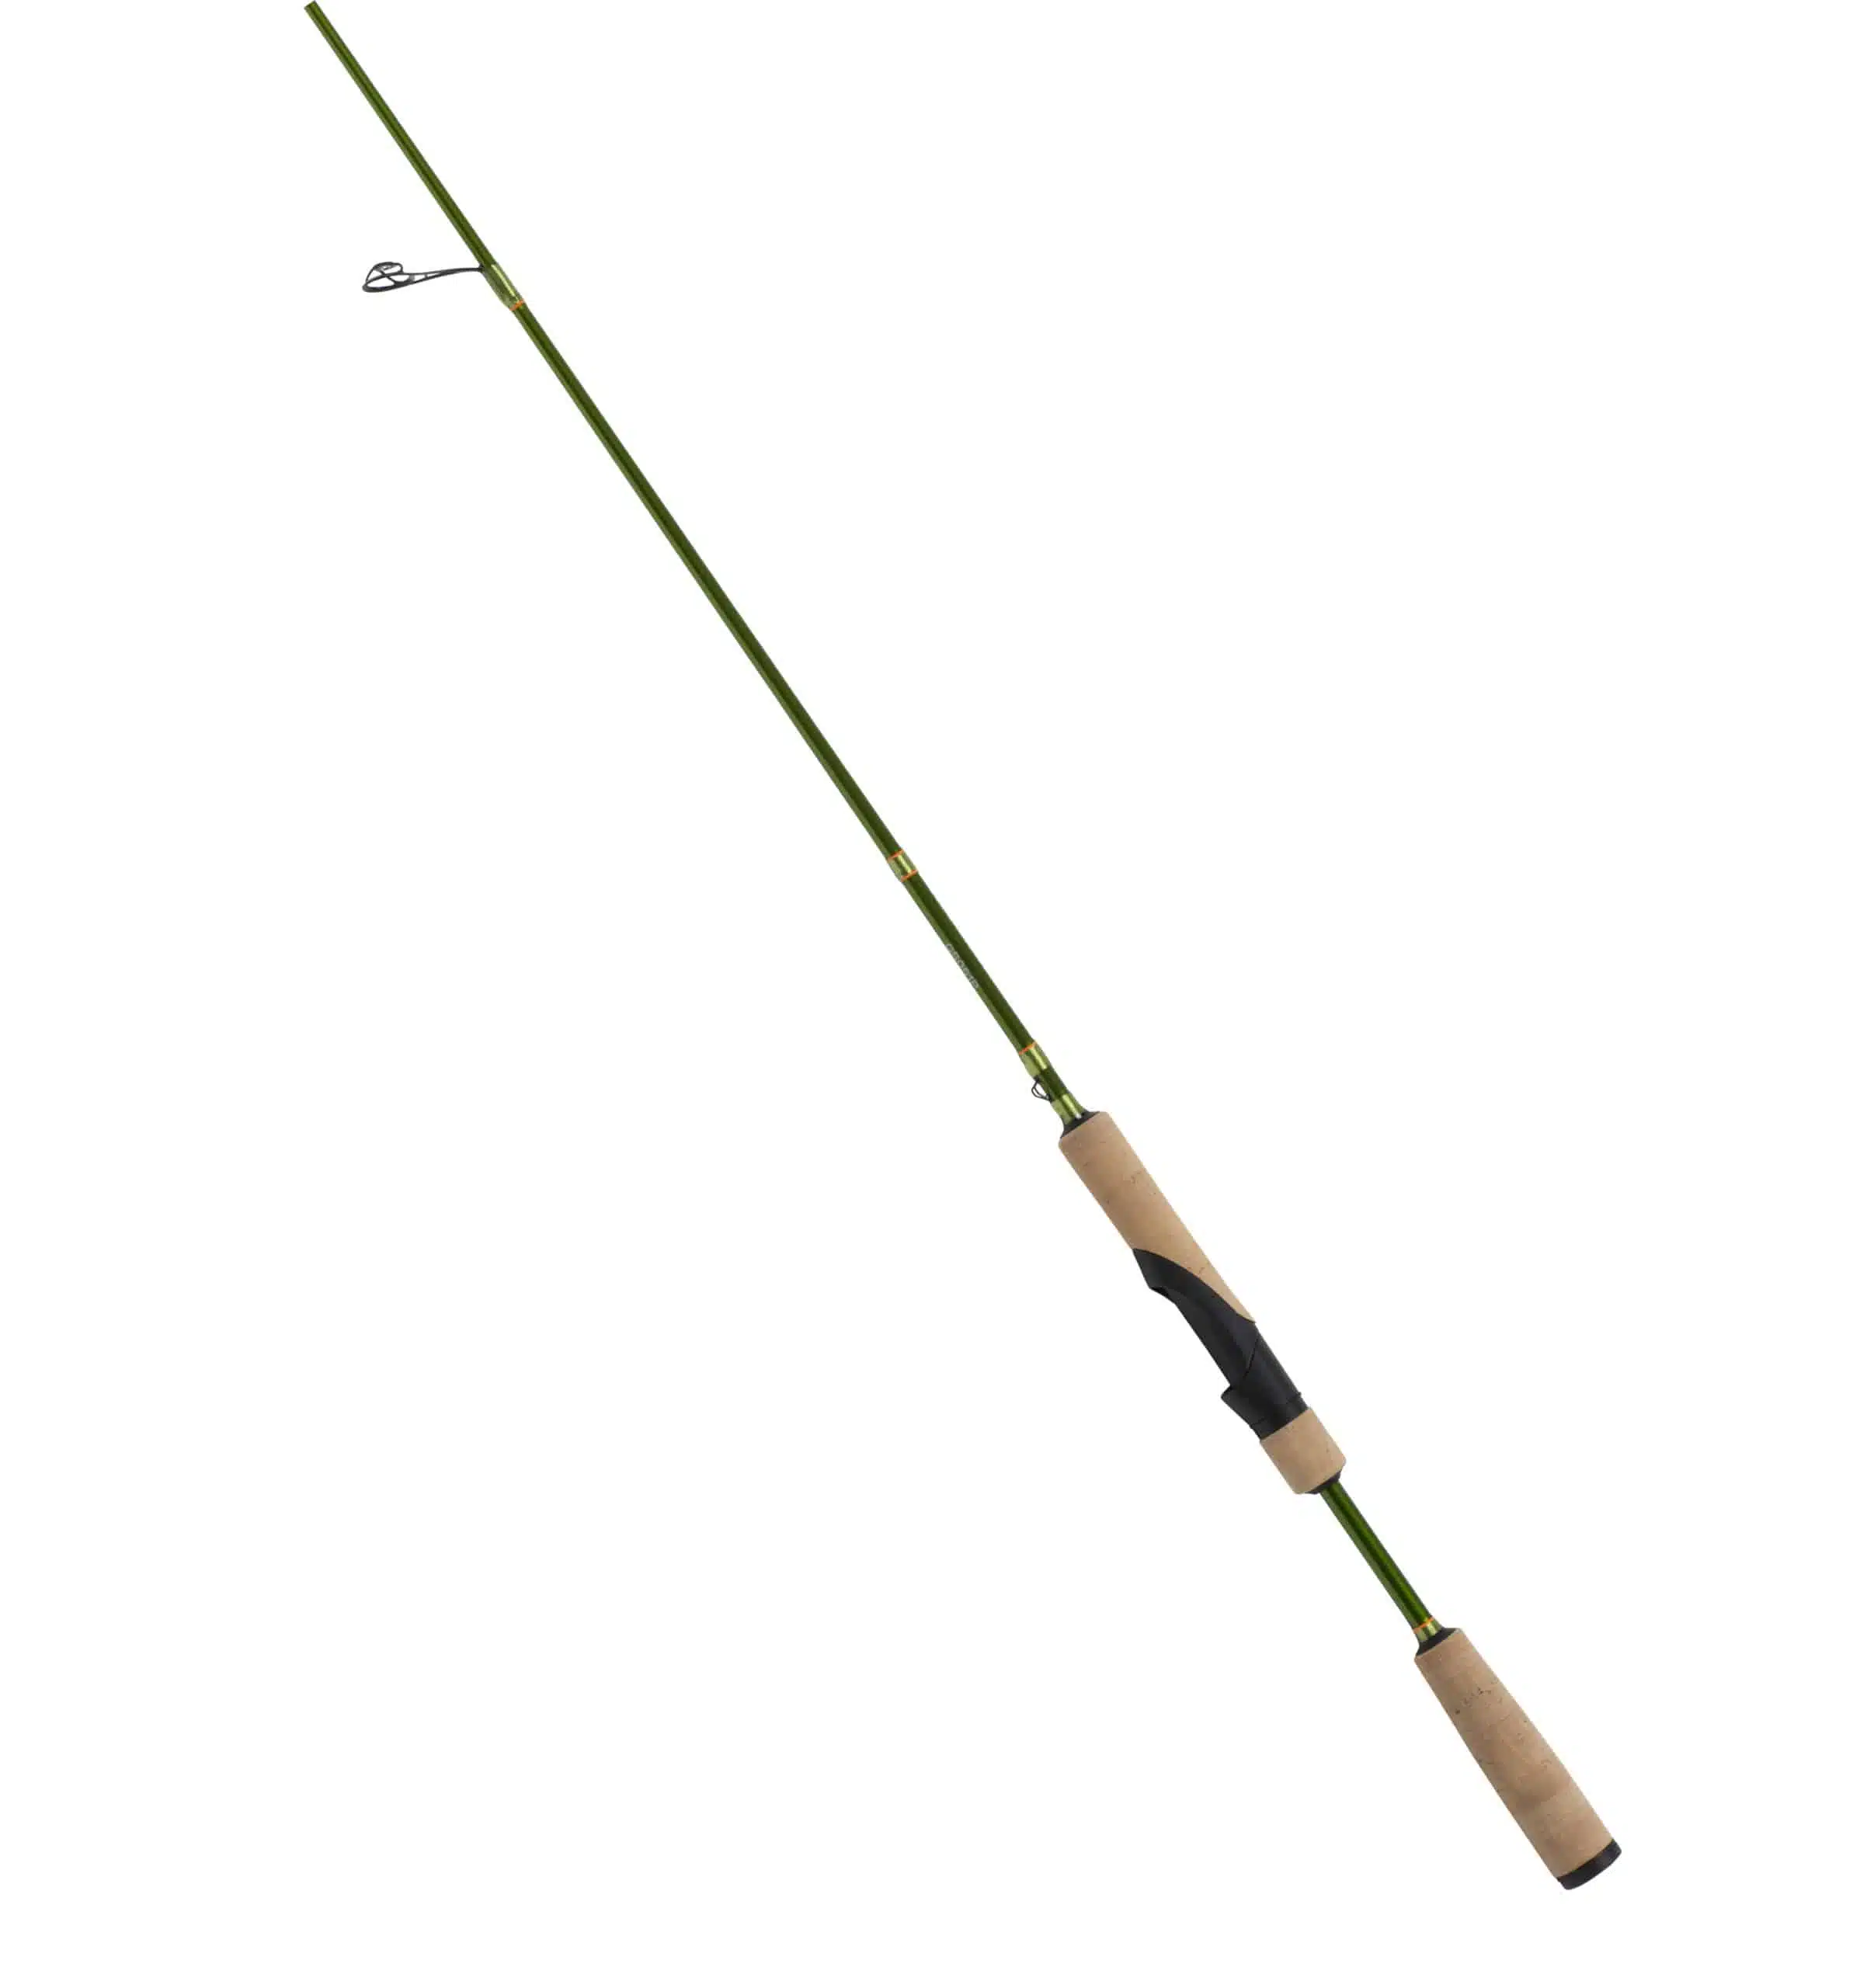 DENALI RODS NEW PRYME SERIES 4' 6 UL SPINNING CRAPPIE POLE, P461SR ONE  PIECE 